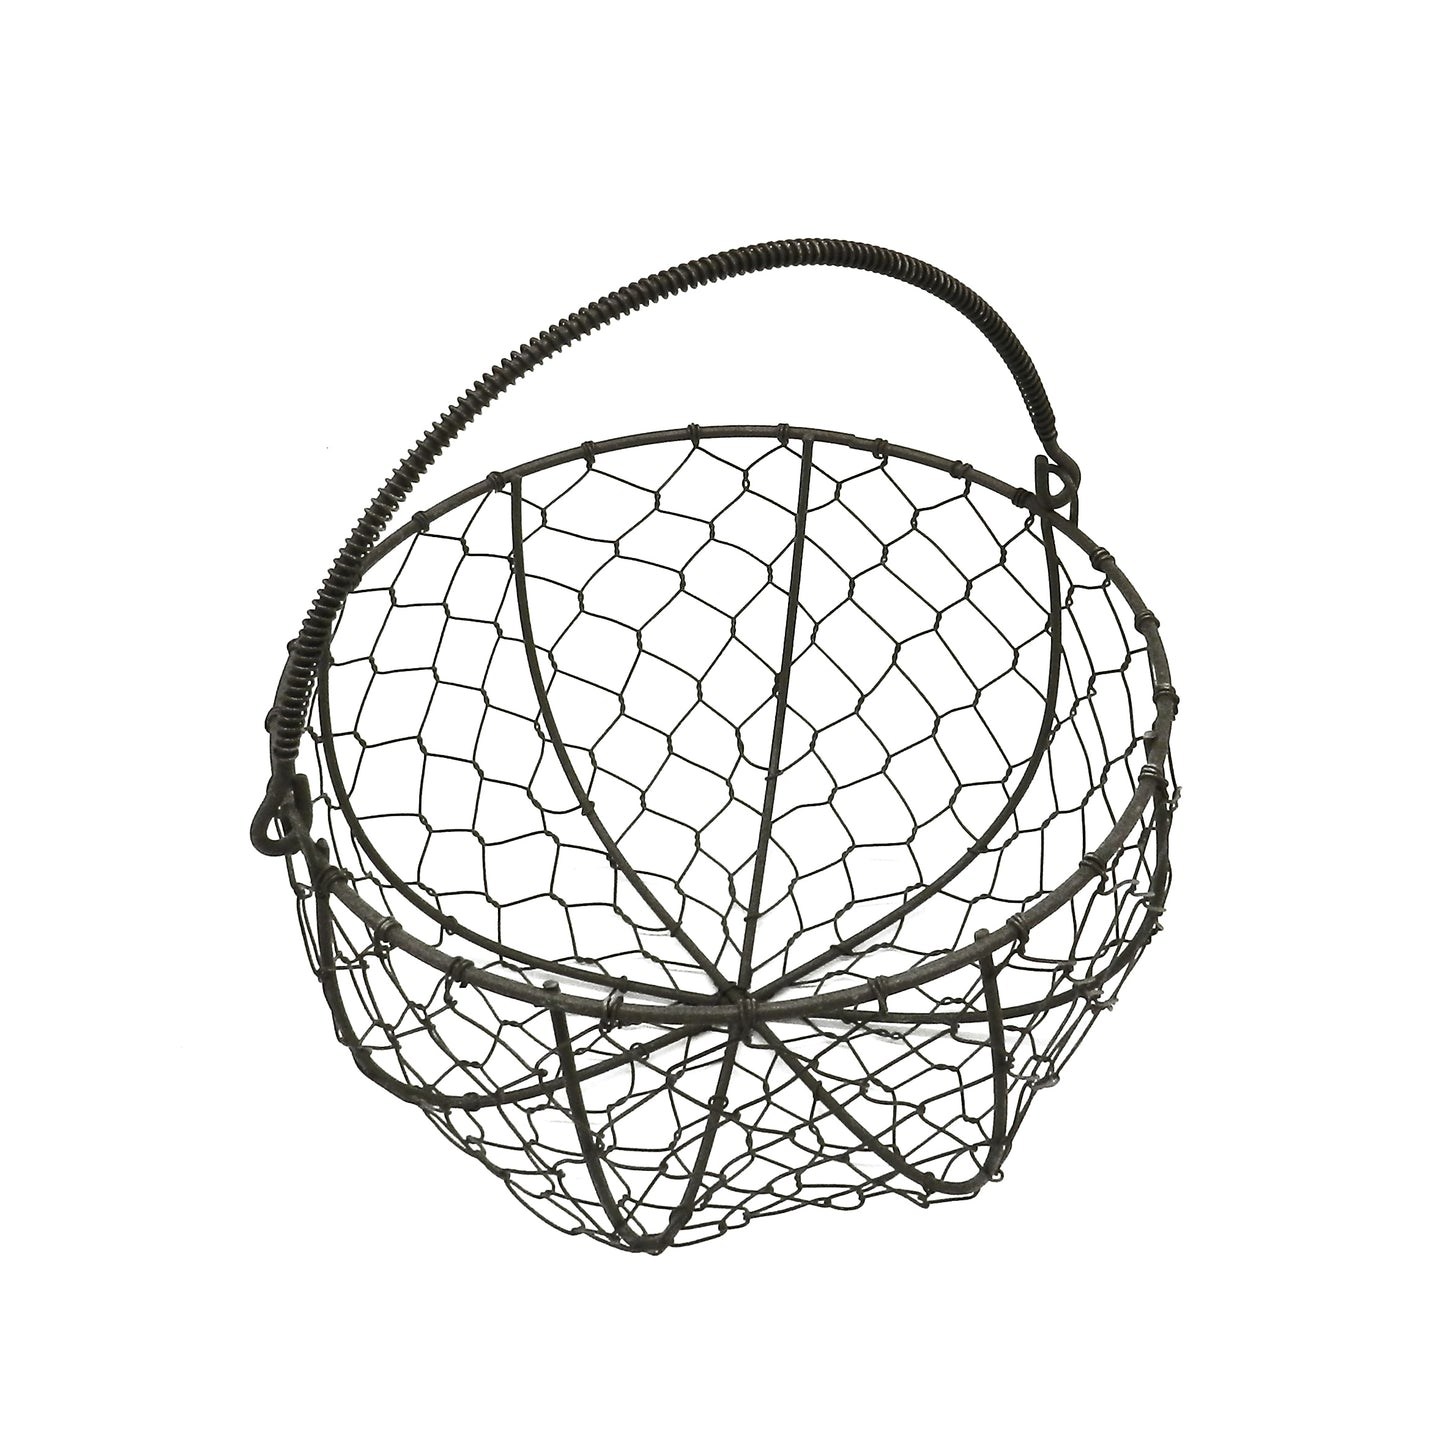 CVHOMEDECO. Round Metal Wire Egg Basket Wire Gathering Basket with Handle Country Vintage Style Storage Basket. Rusty, Dia. 8 X H 4.75 Inch